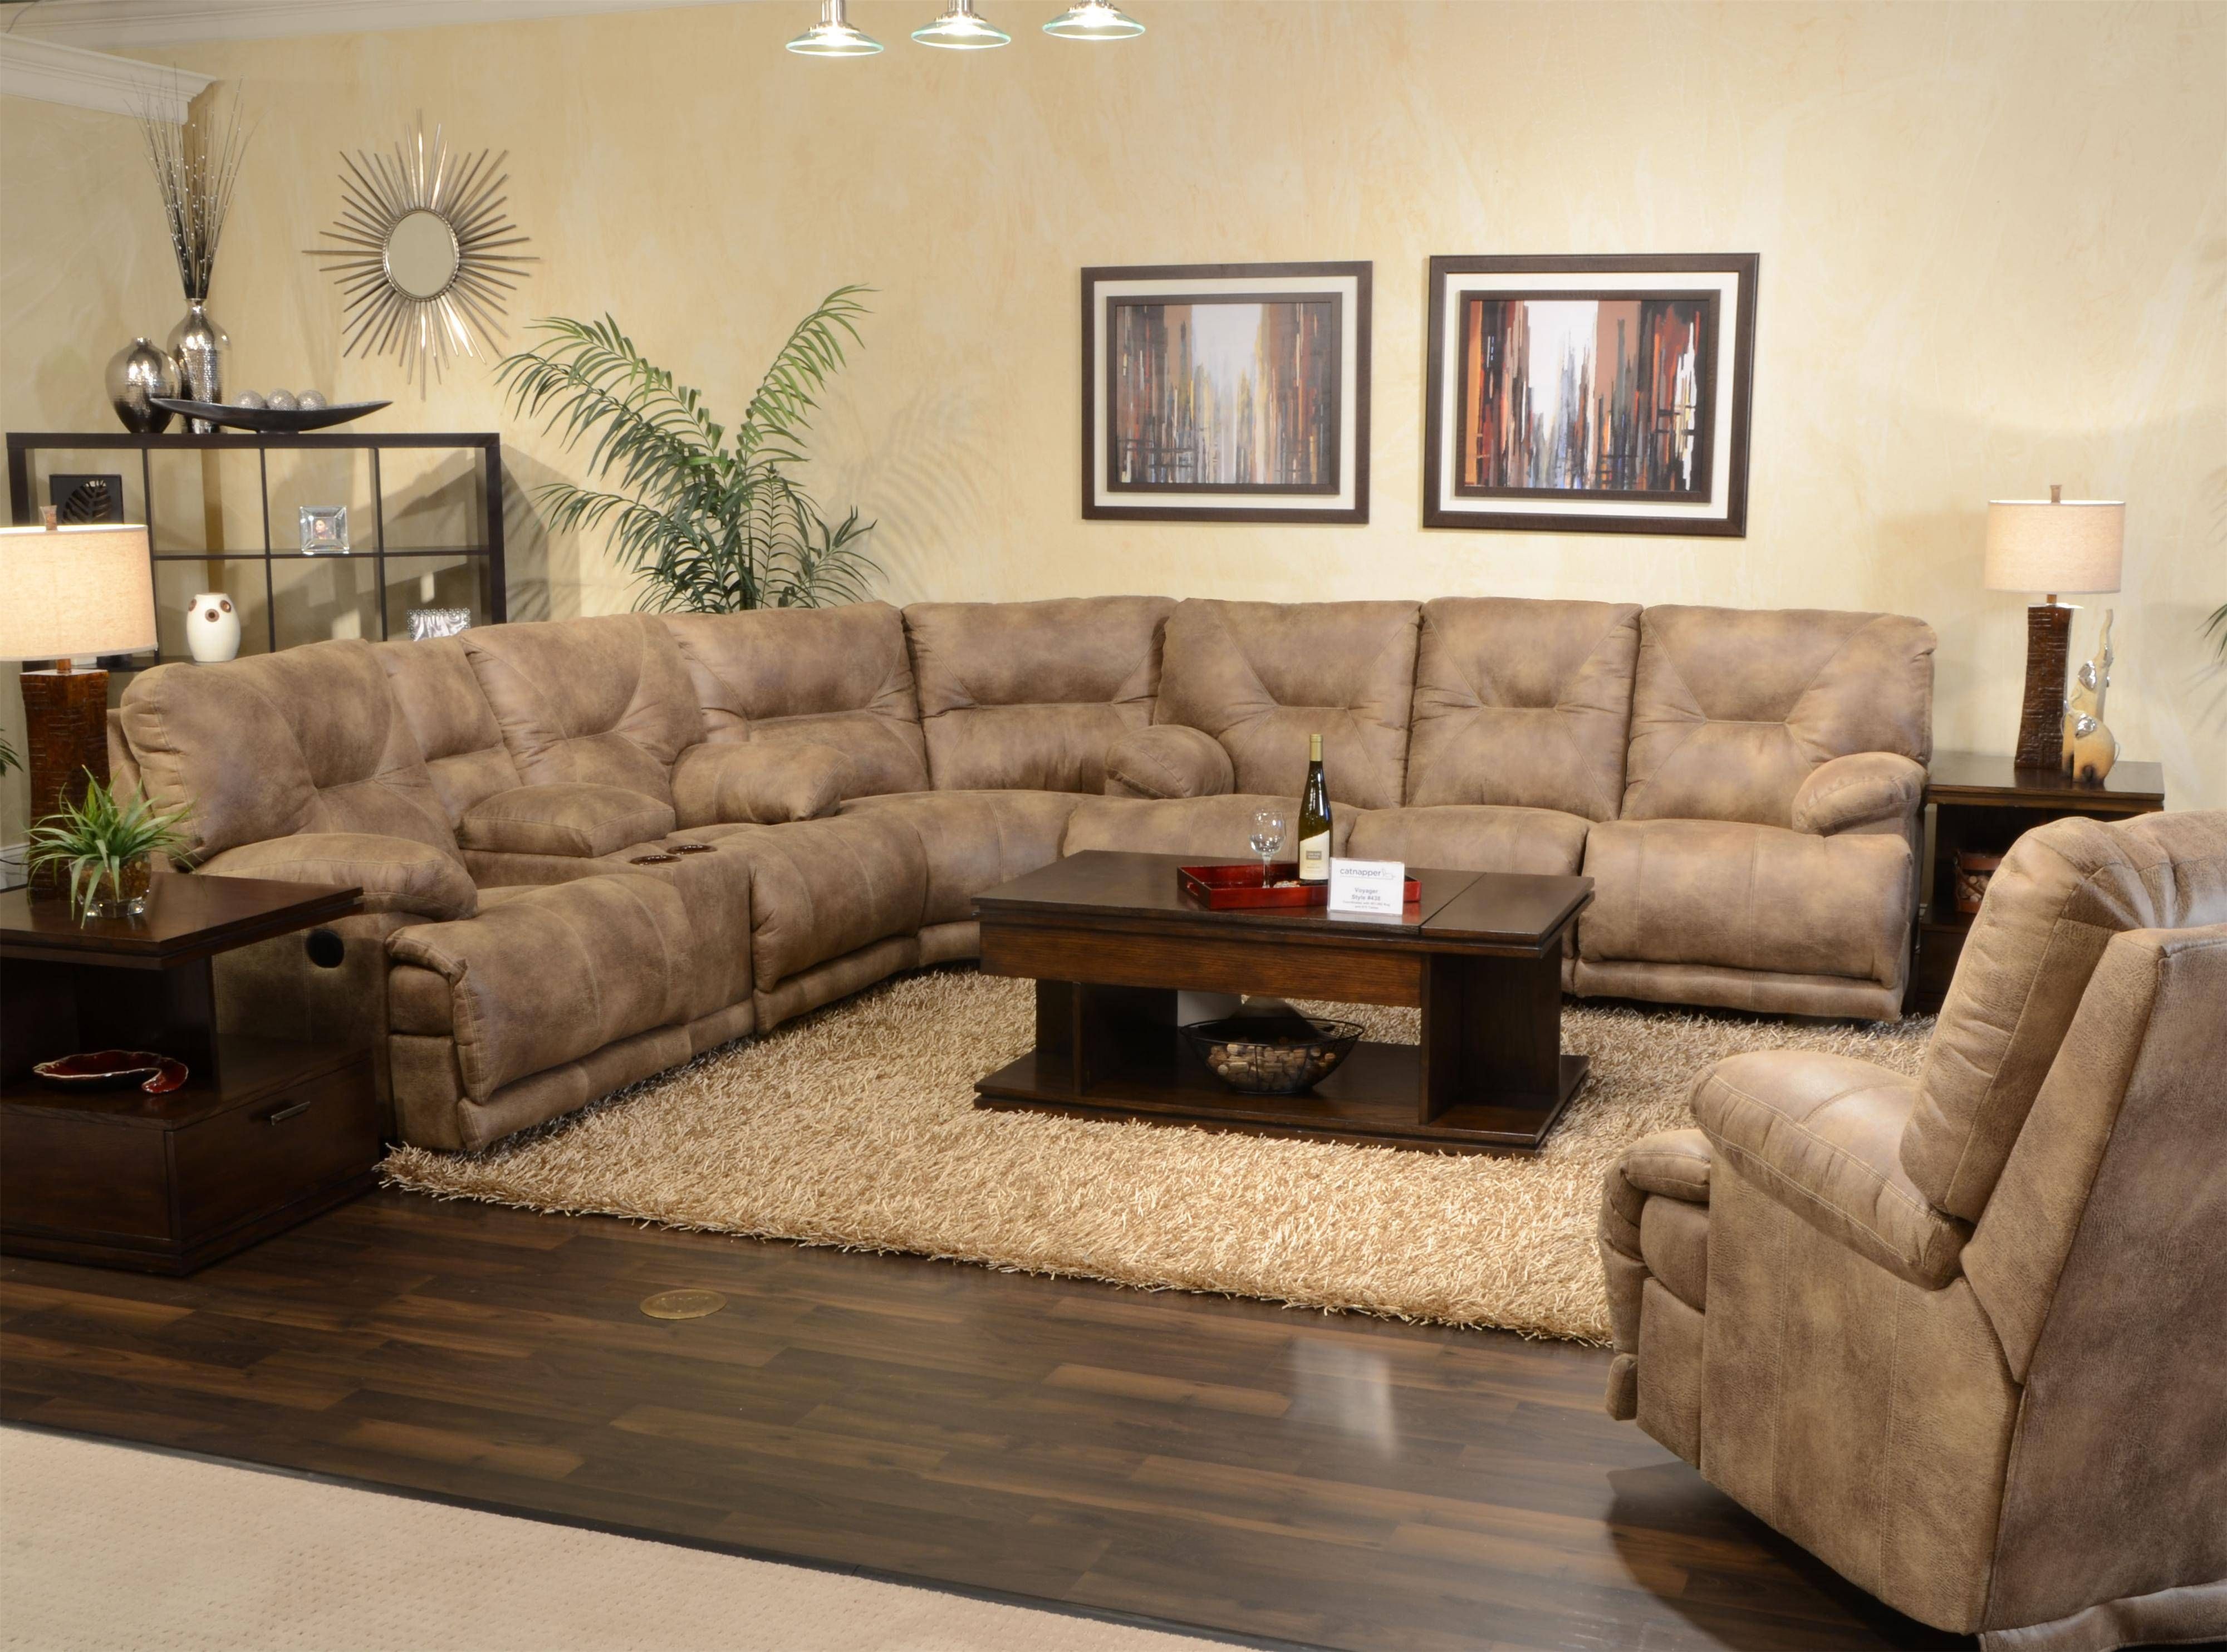 Appealing Cheap Reclining Sectional Sofas 82 About Remodel Home Intended For Theatre Sectional Sofas (View 13 of 30)